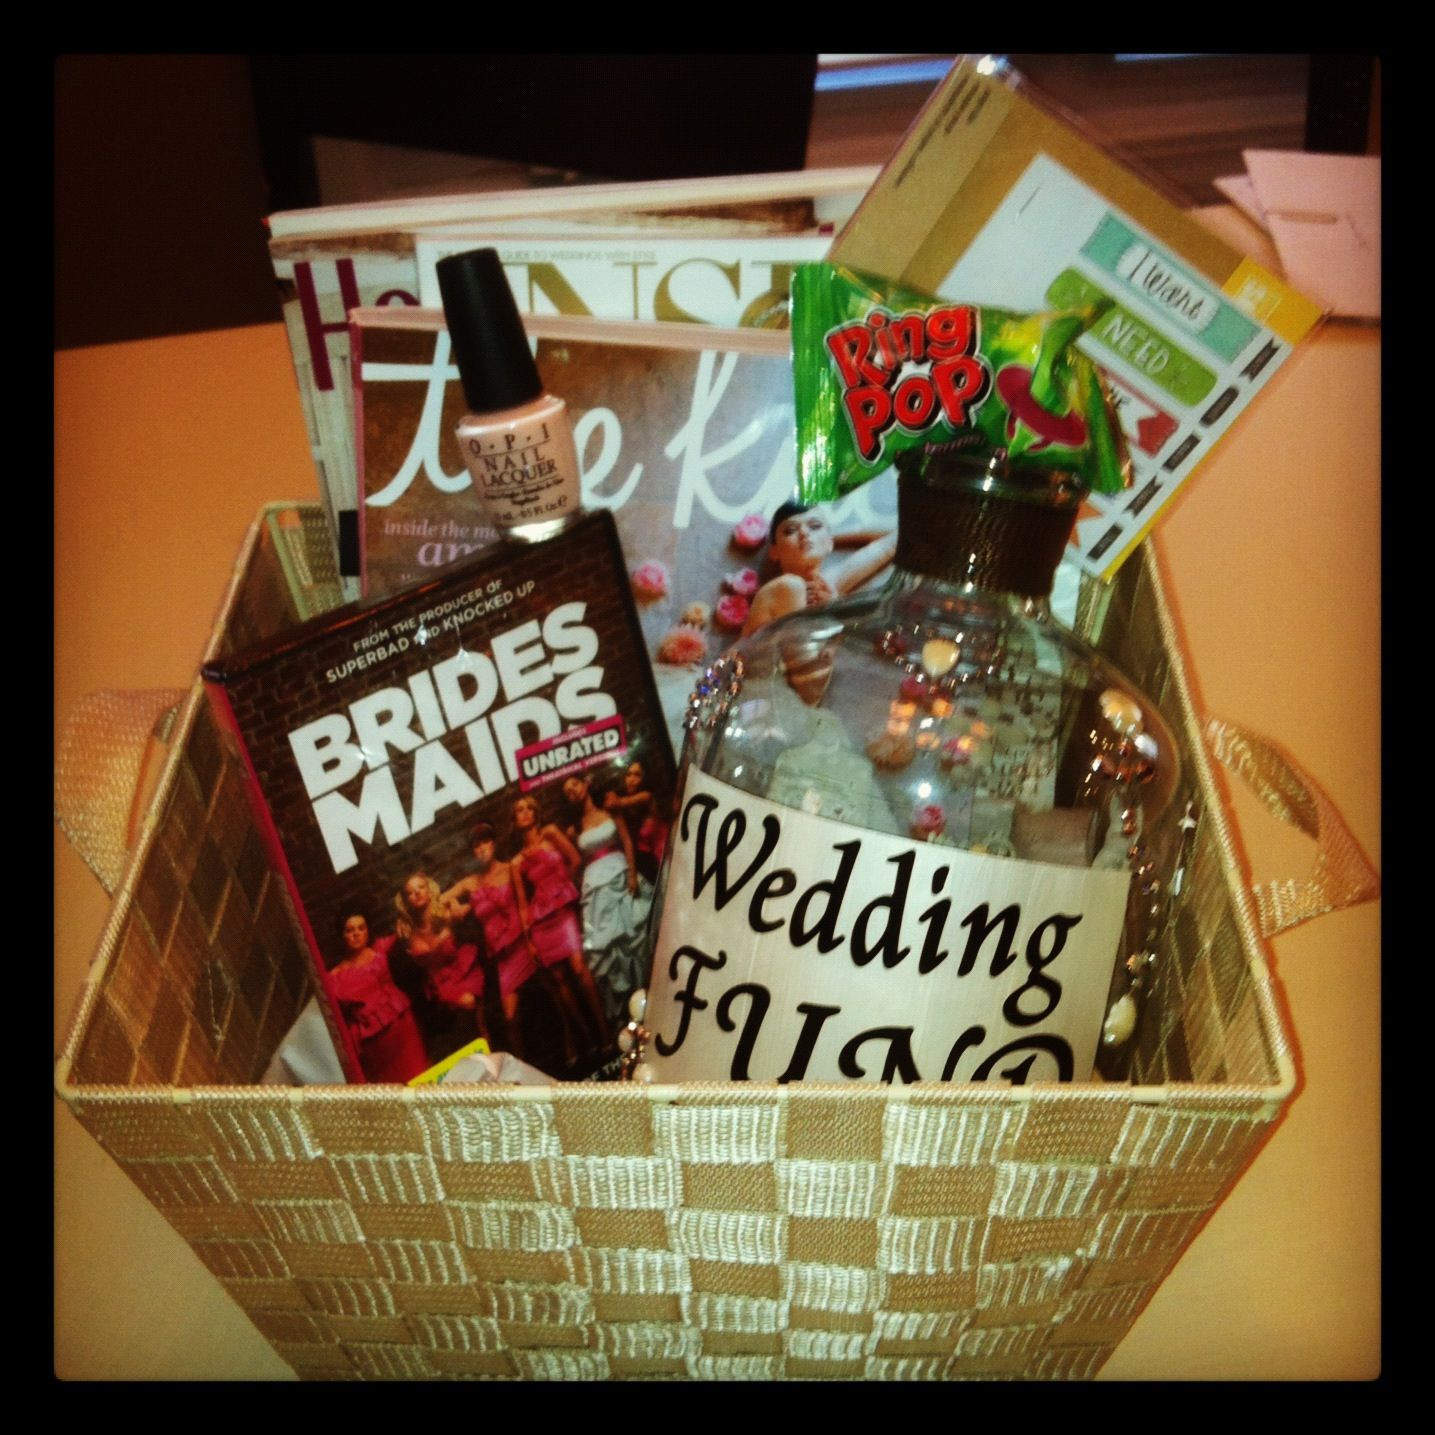 Engagement Party Gift Ideas Pinterest
 The 25 best Engagement t baskets ideas on Pinterest